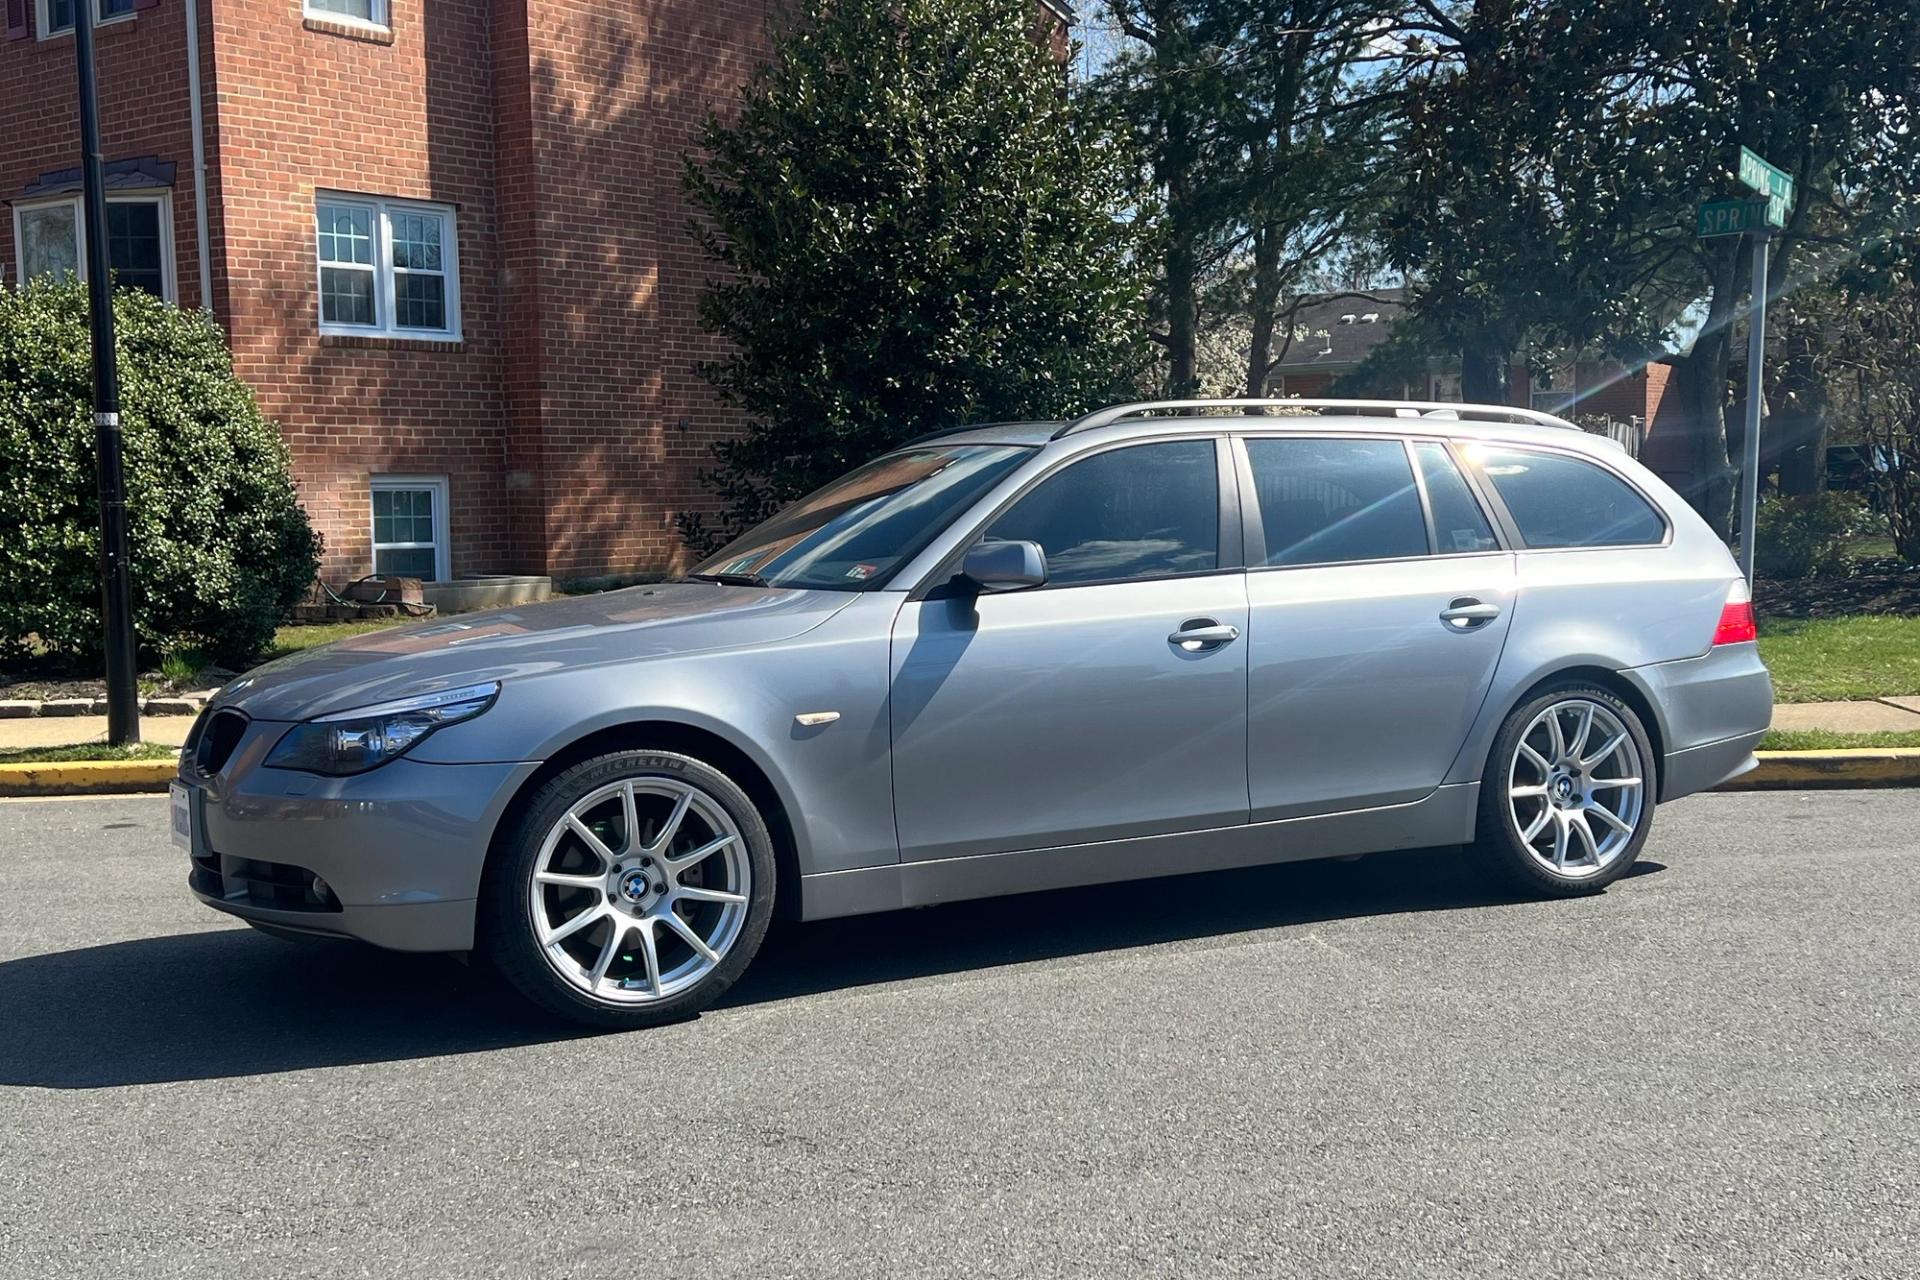 BMW E61 Wagon 5 Series with 19" SM-10 in Race Silver